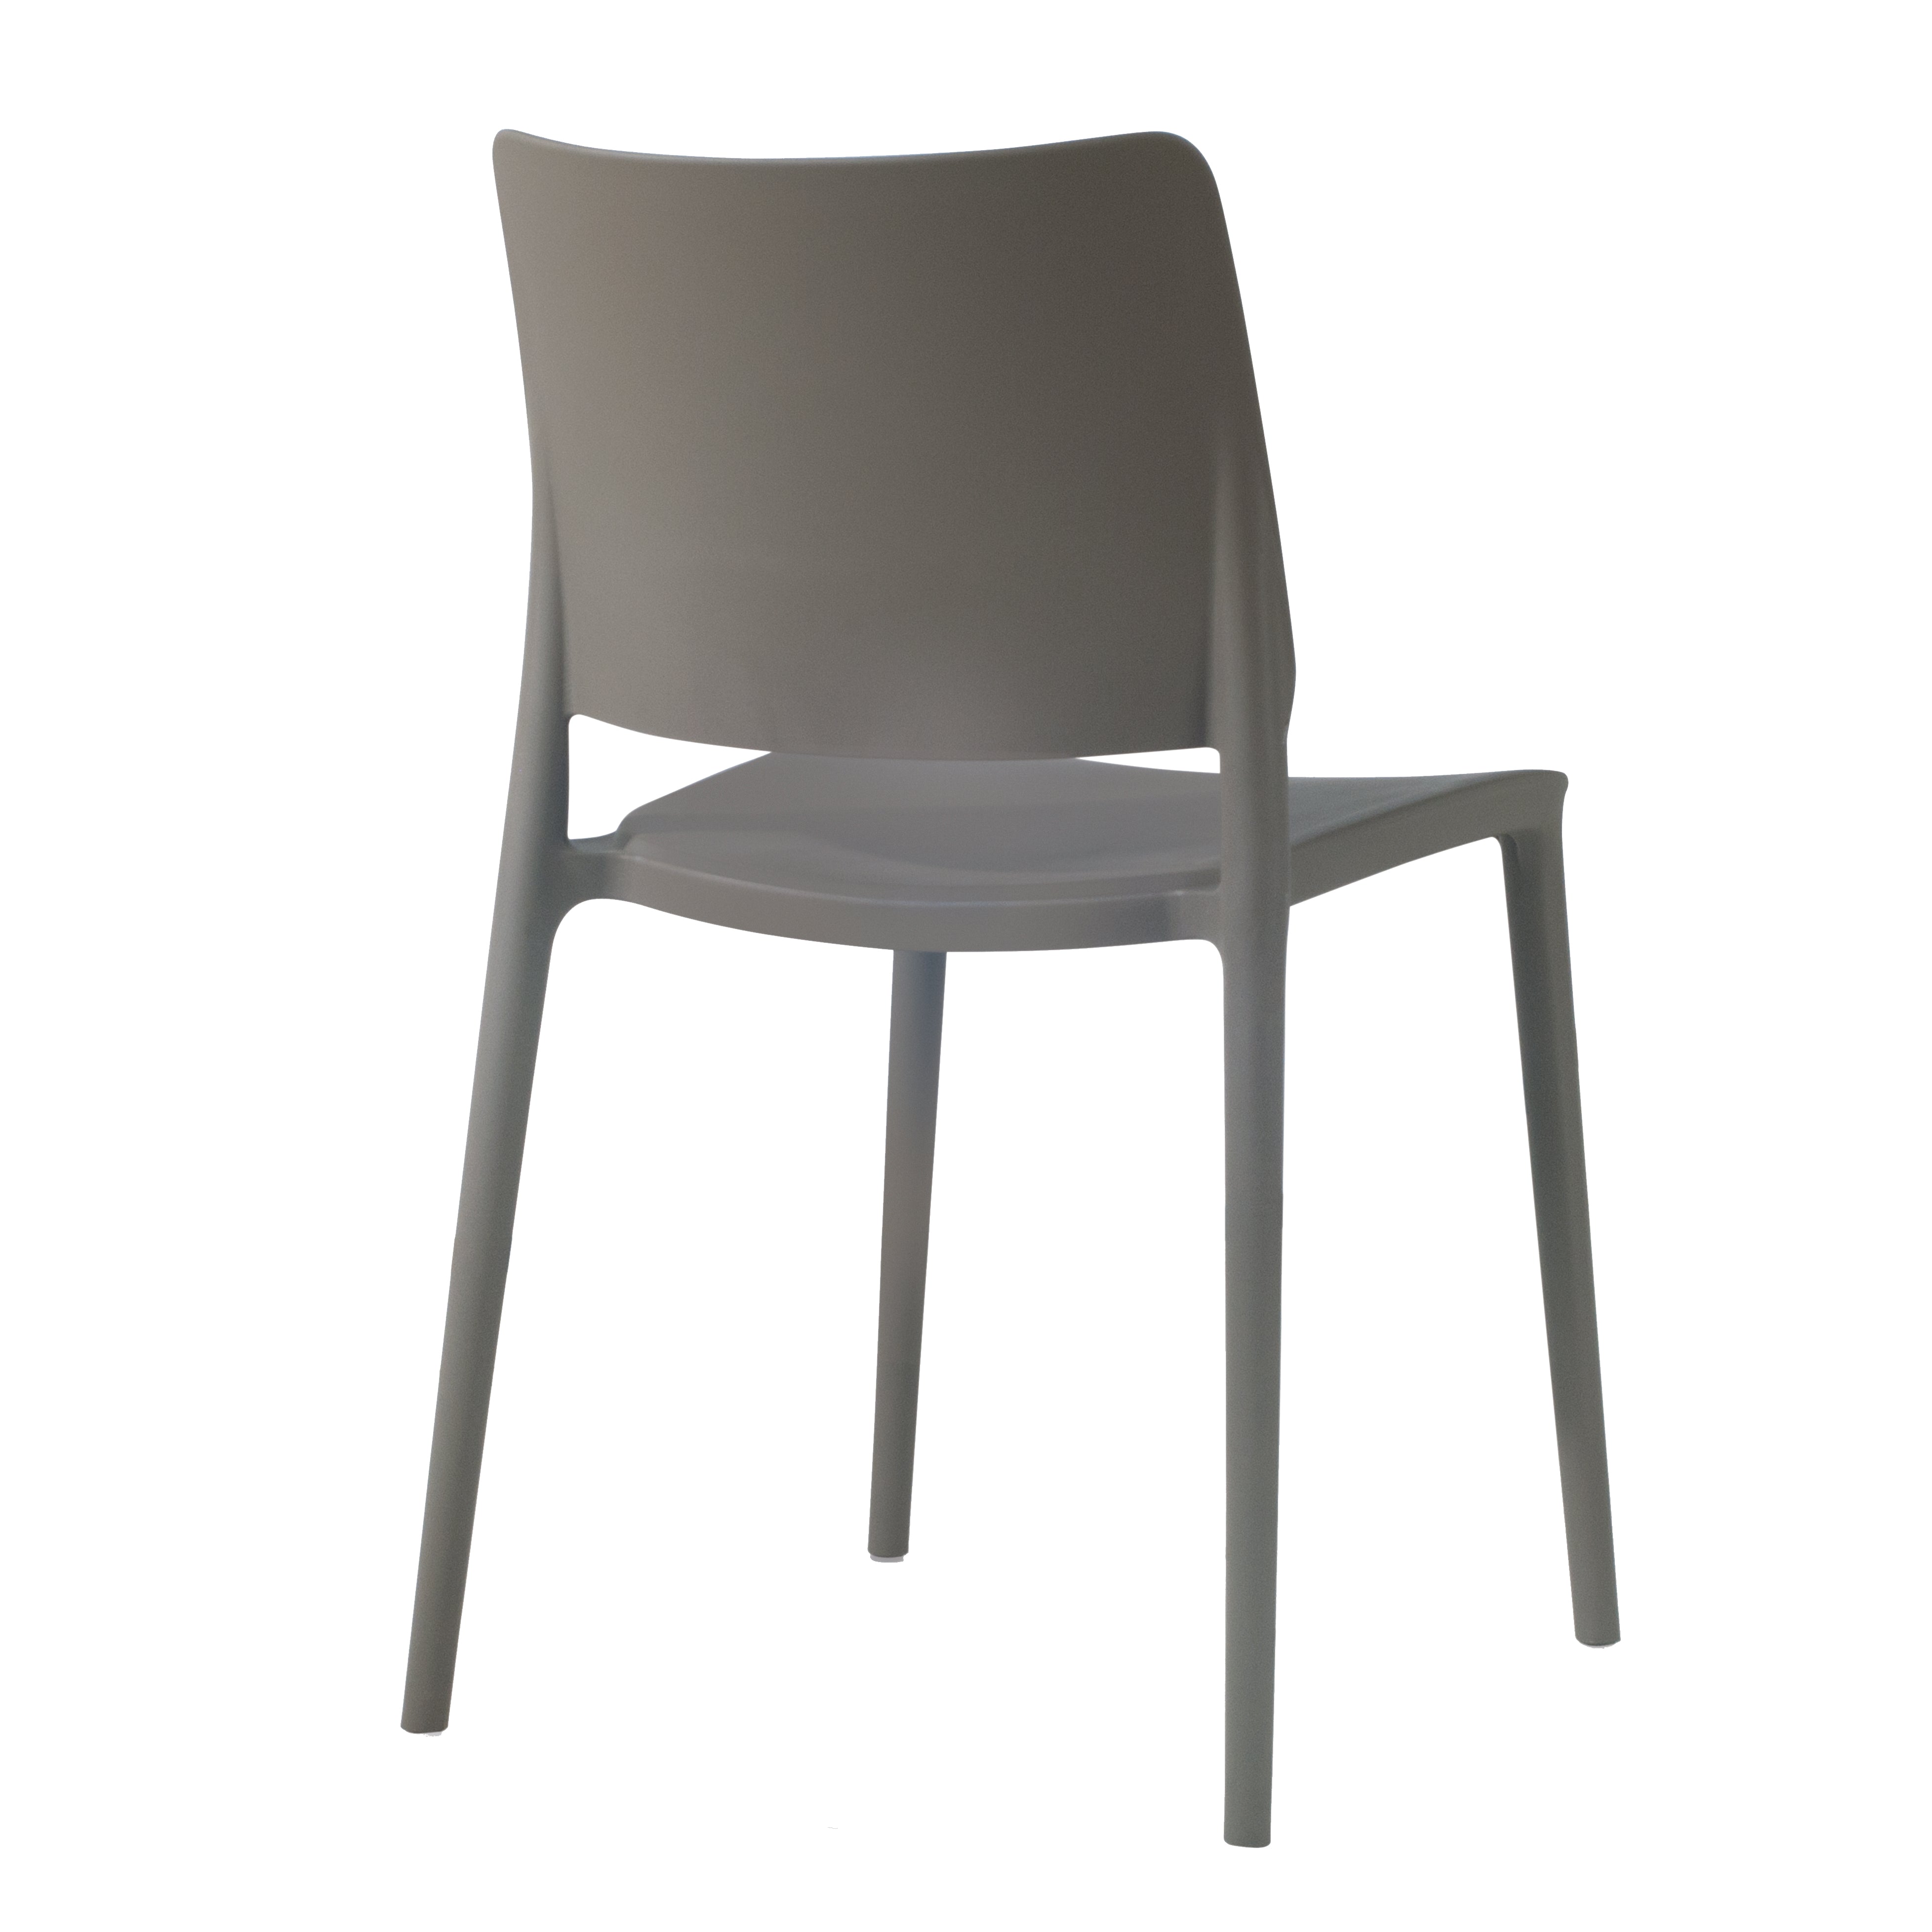 Cleo Patio Dining Chair in Taupe - (Set of 2)